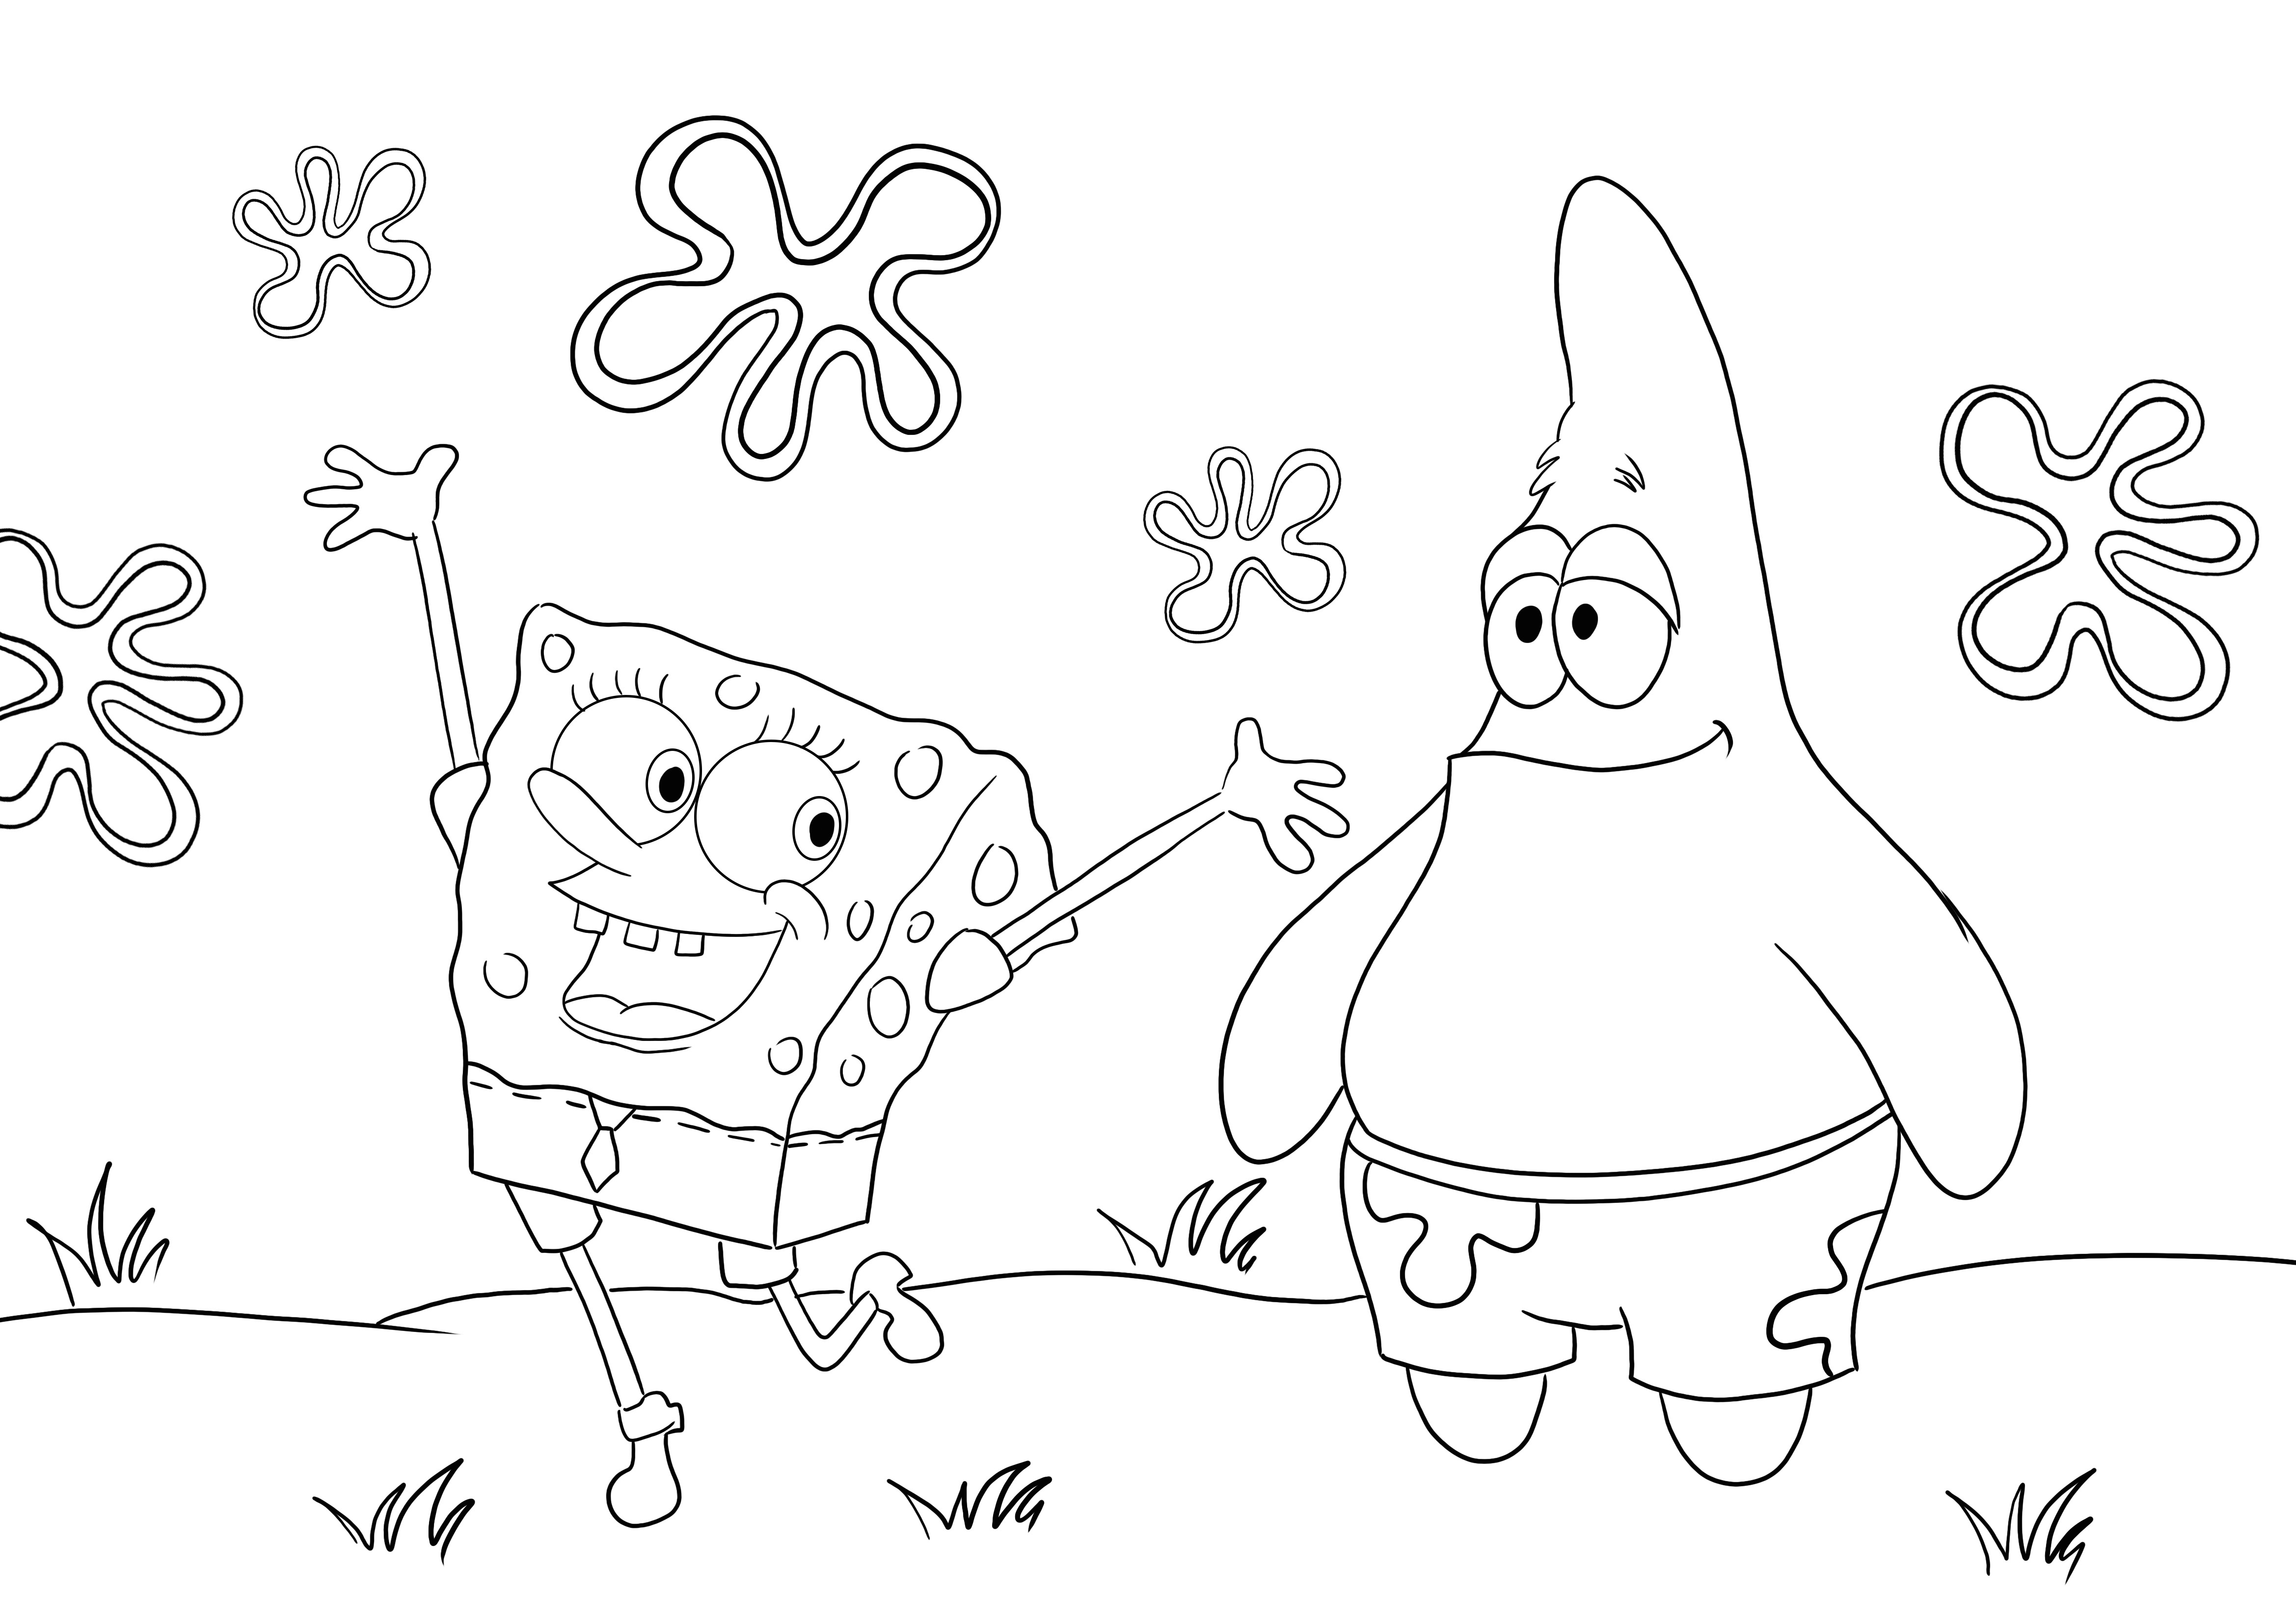 Happy Sponge SquarePants and his buddy Patrick for free coloring and printing